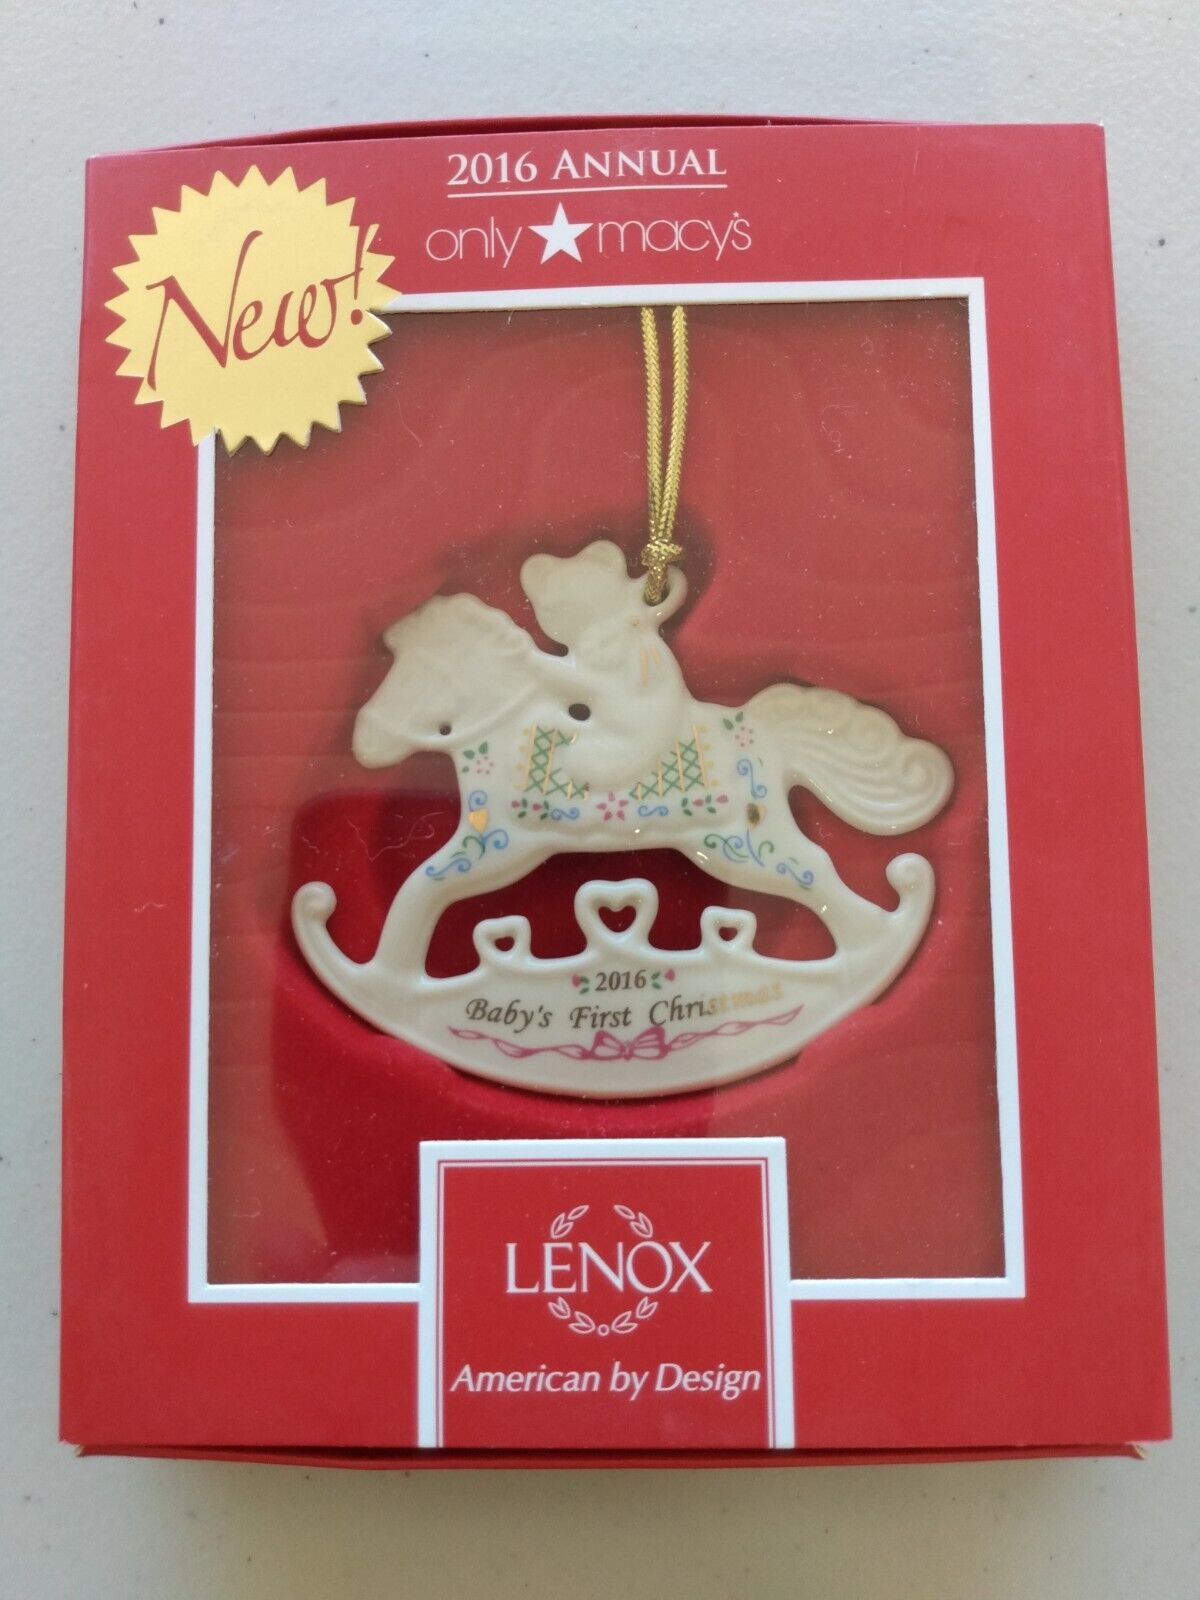 Baby's First Christmas Rocking Horse Ornament by Lenox, 2016